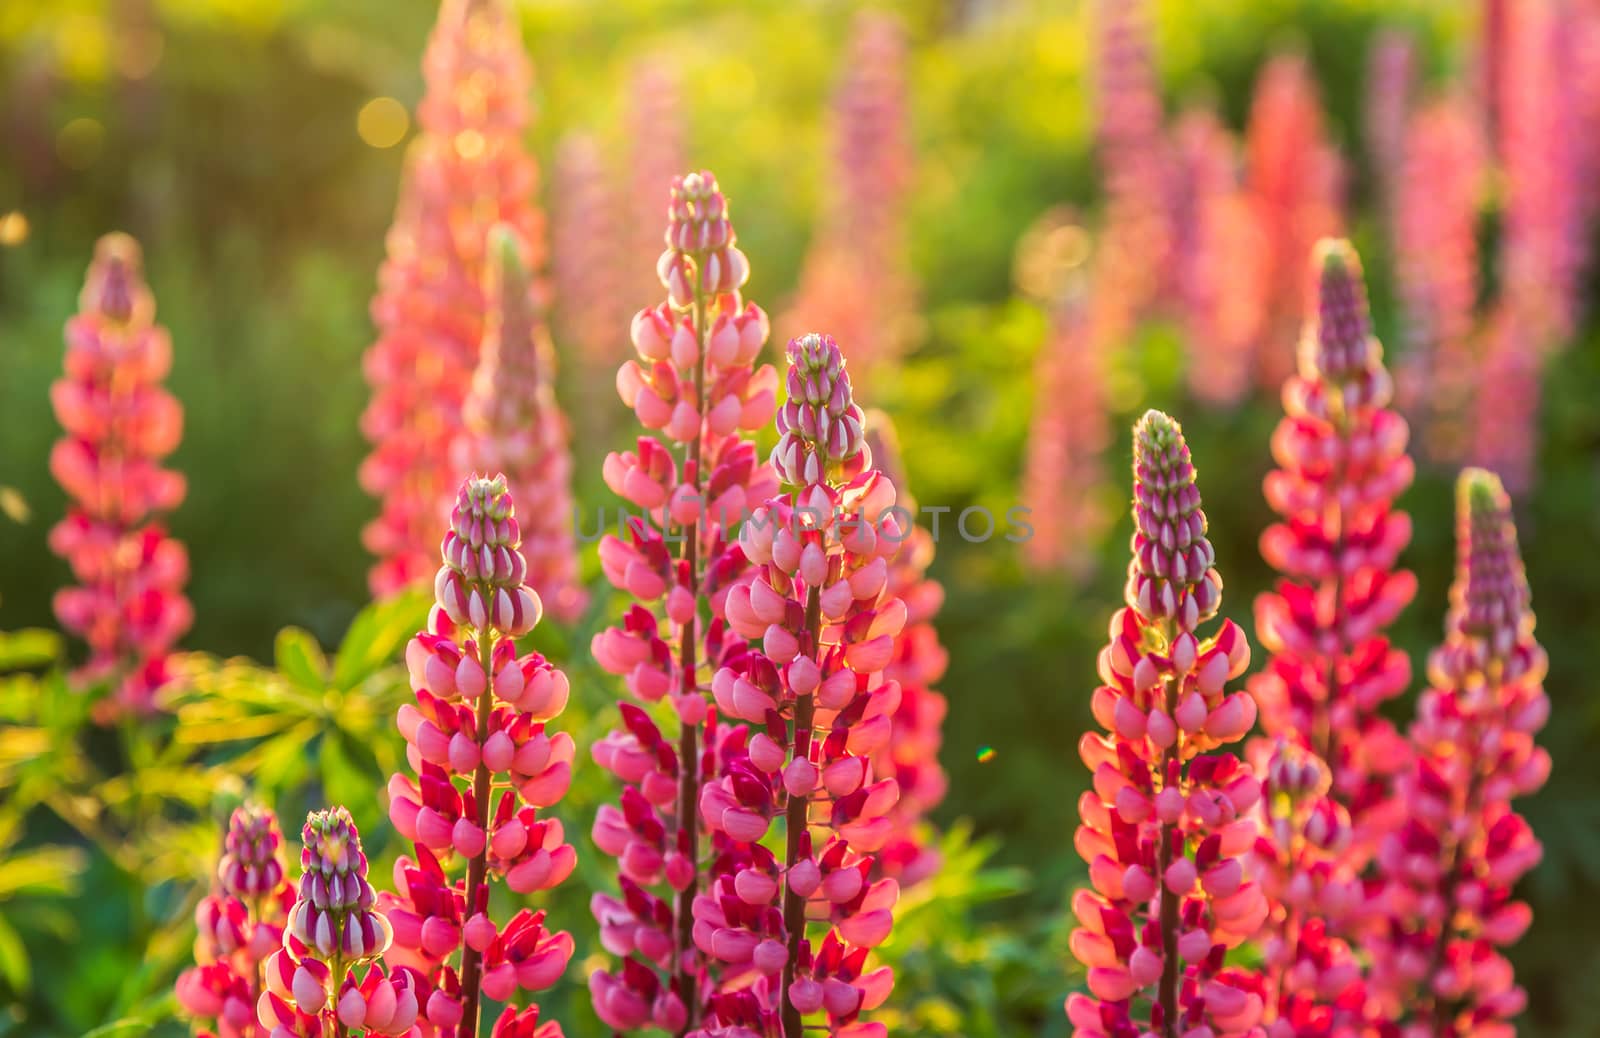 Wild pink lupine flowers in the sunlight